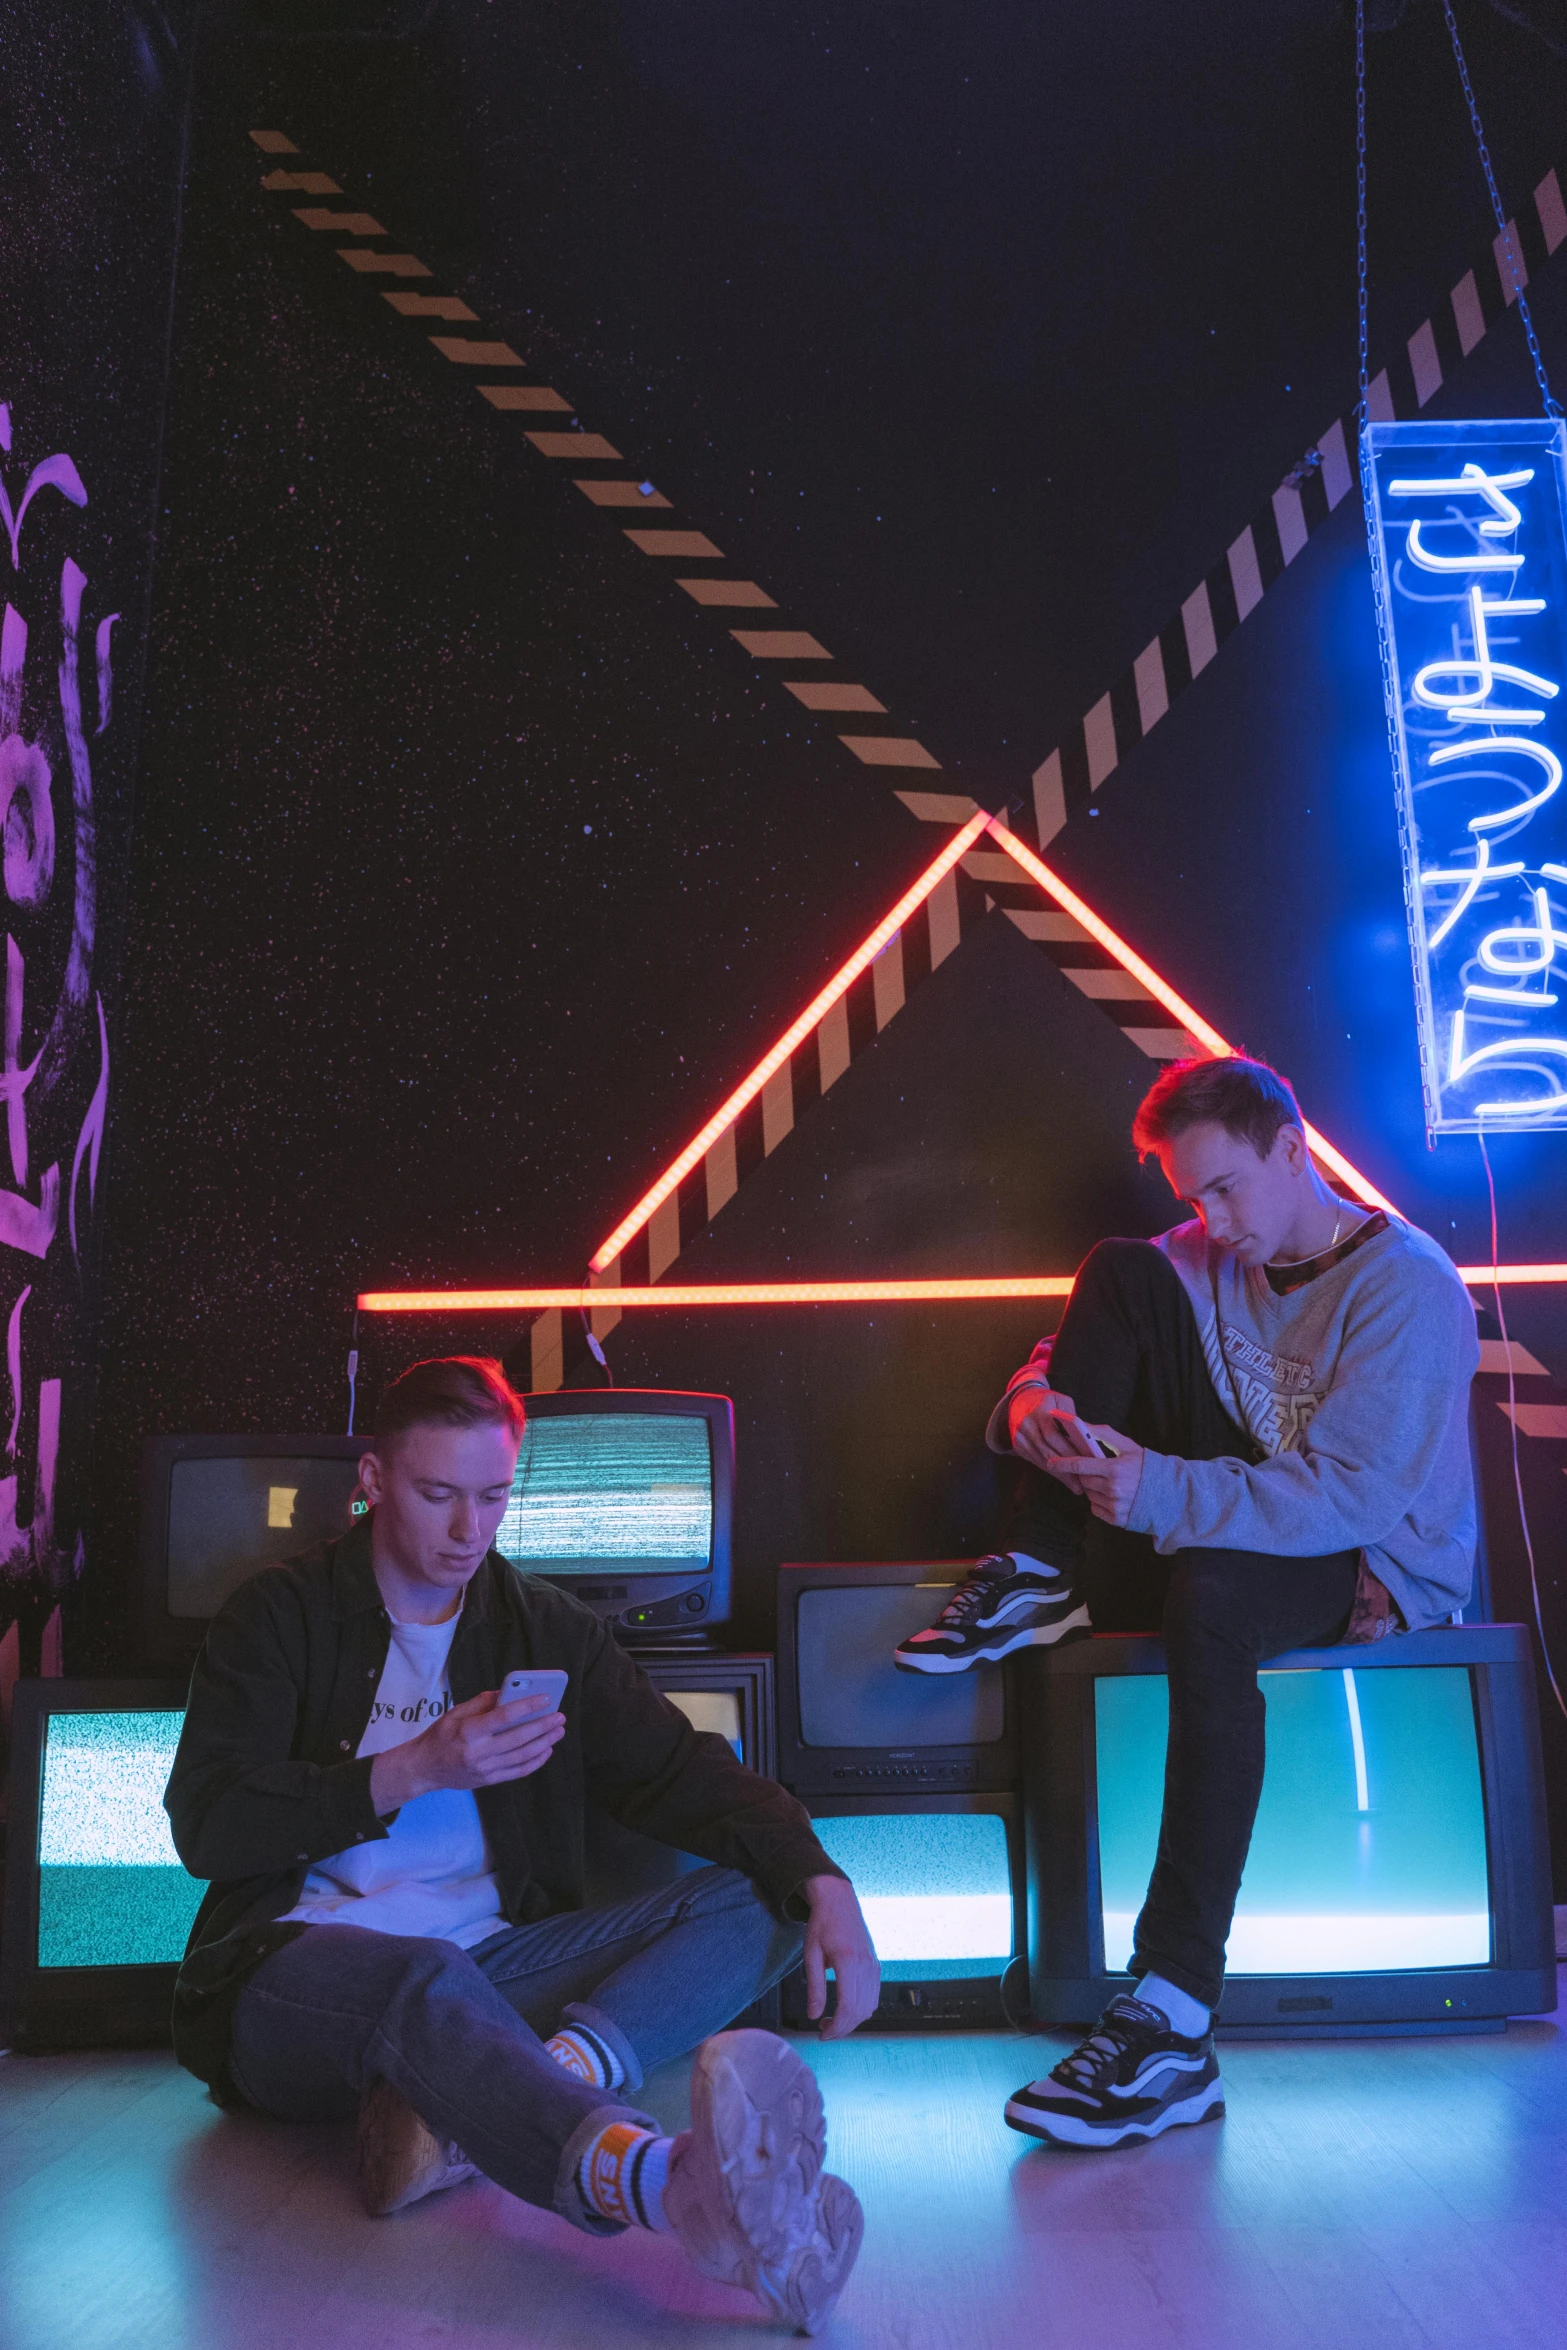 a group of people sitting next to each other on a stage, an album cover, pexels, graffiti, cyber neon lighting, two buddies sitting in a room, computer aesthetic, merchants